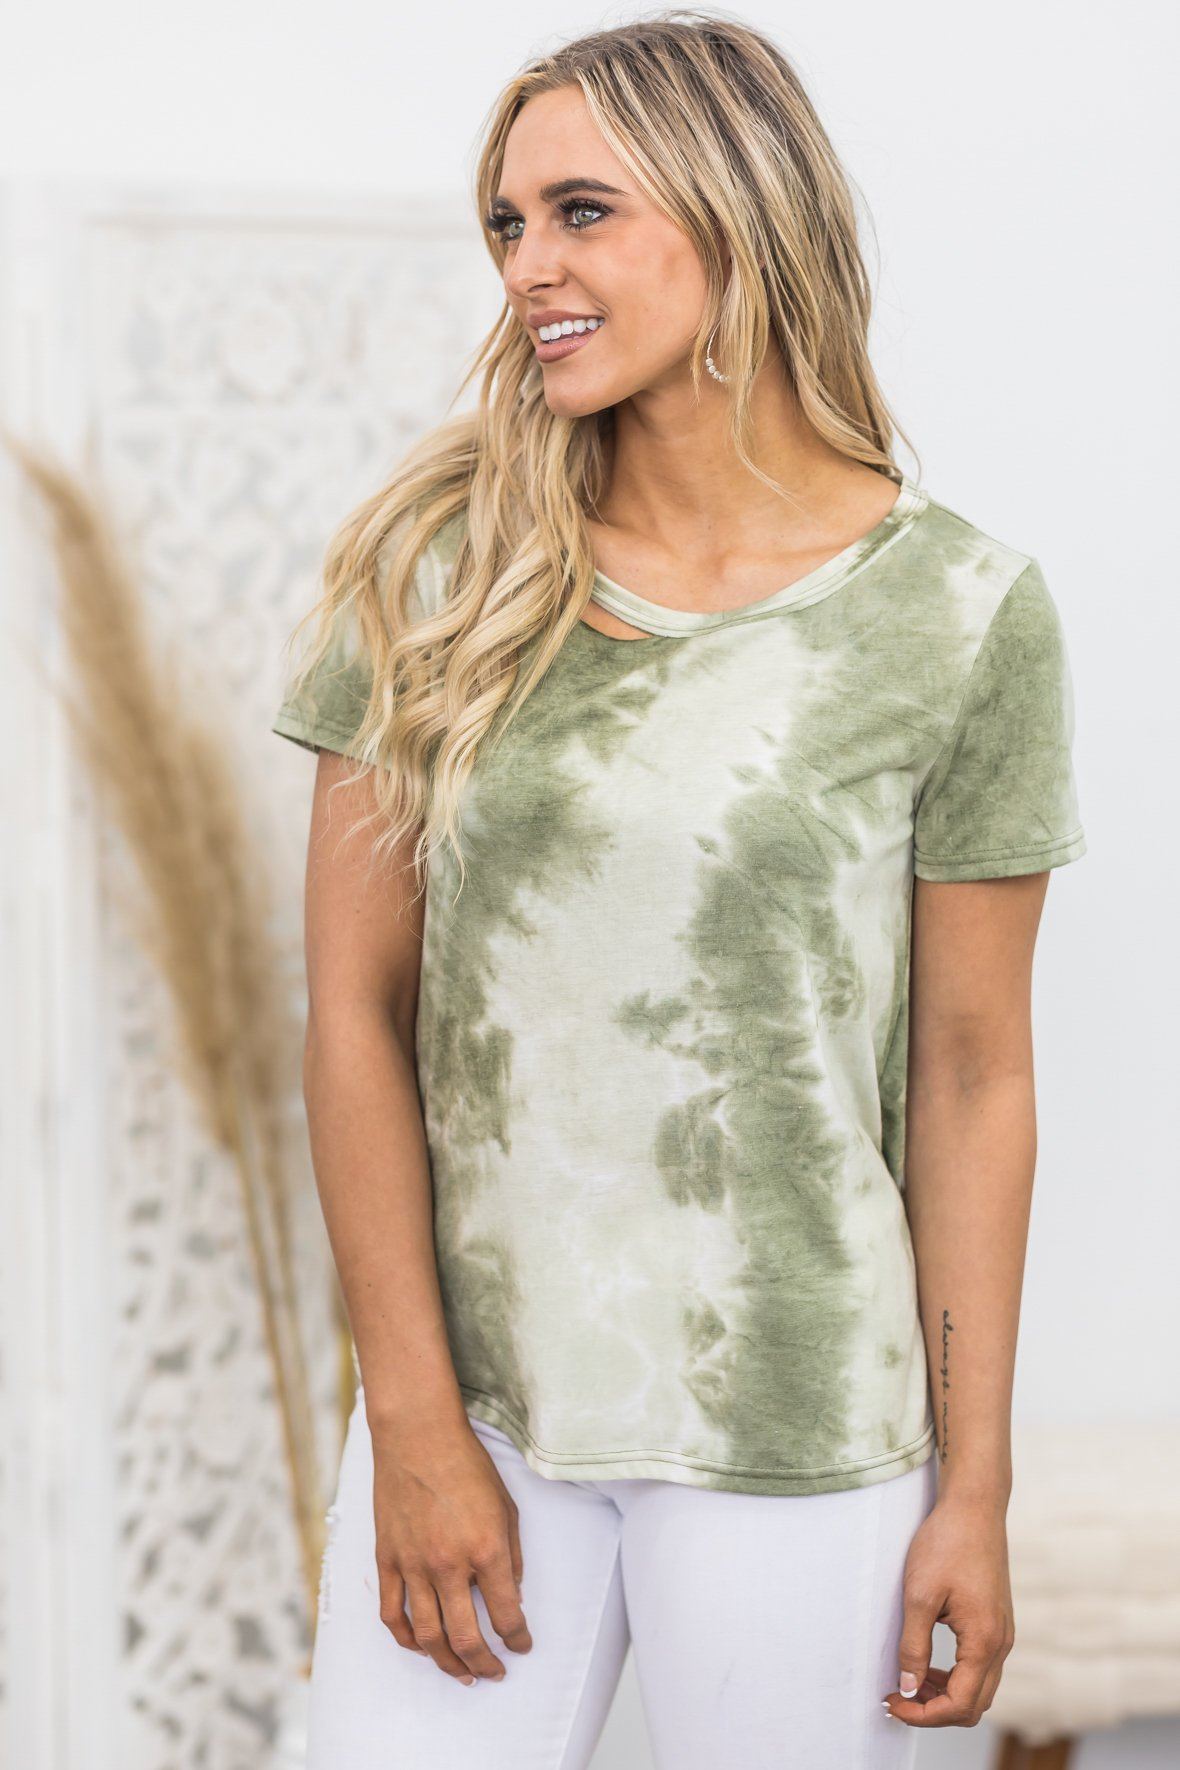 Lightning Crashes Tie Dye Top in Olive - Filly Flair